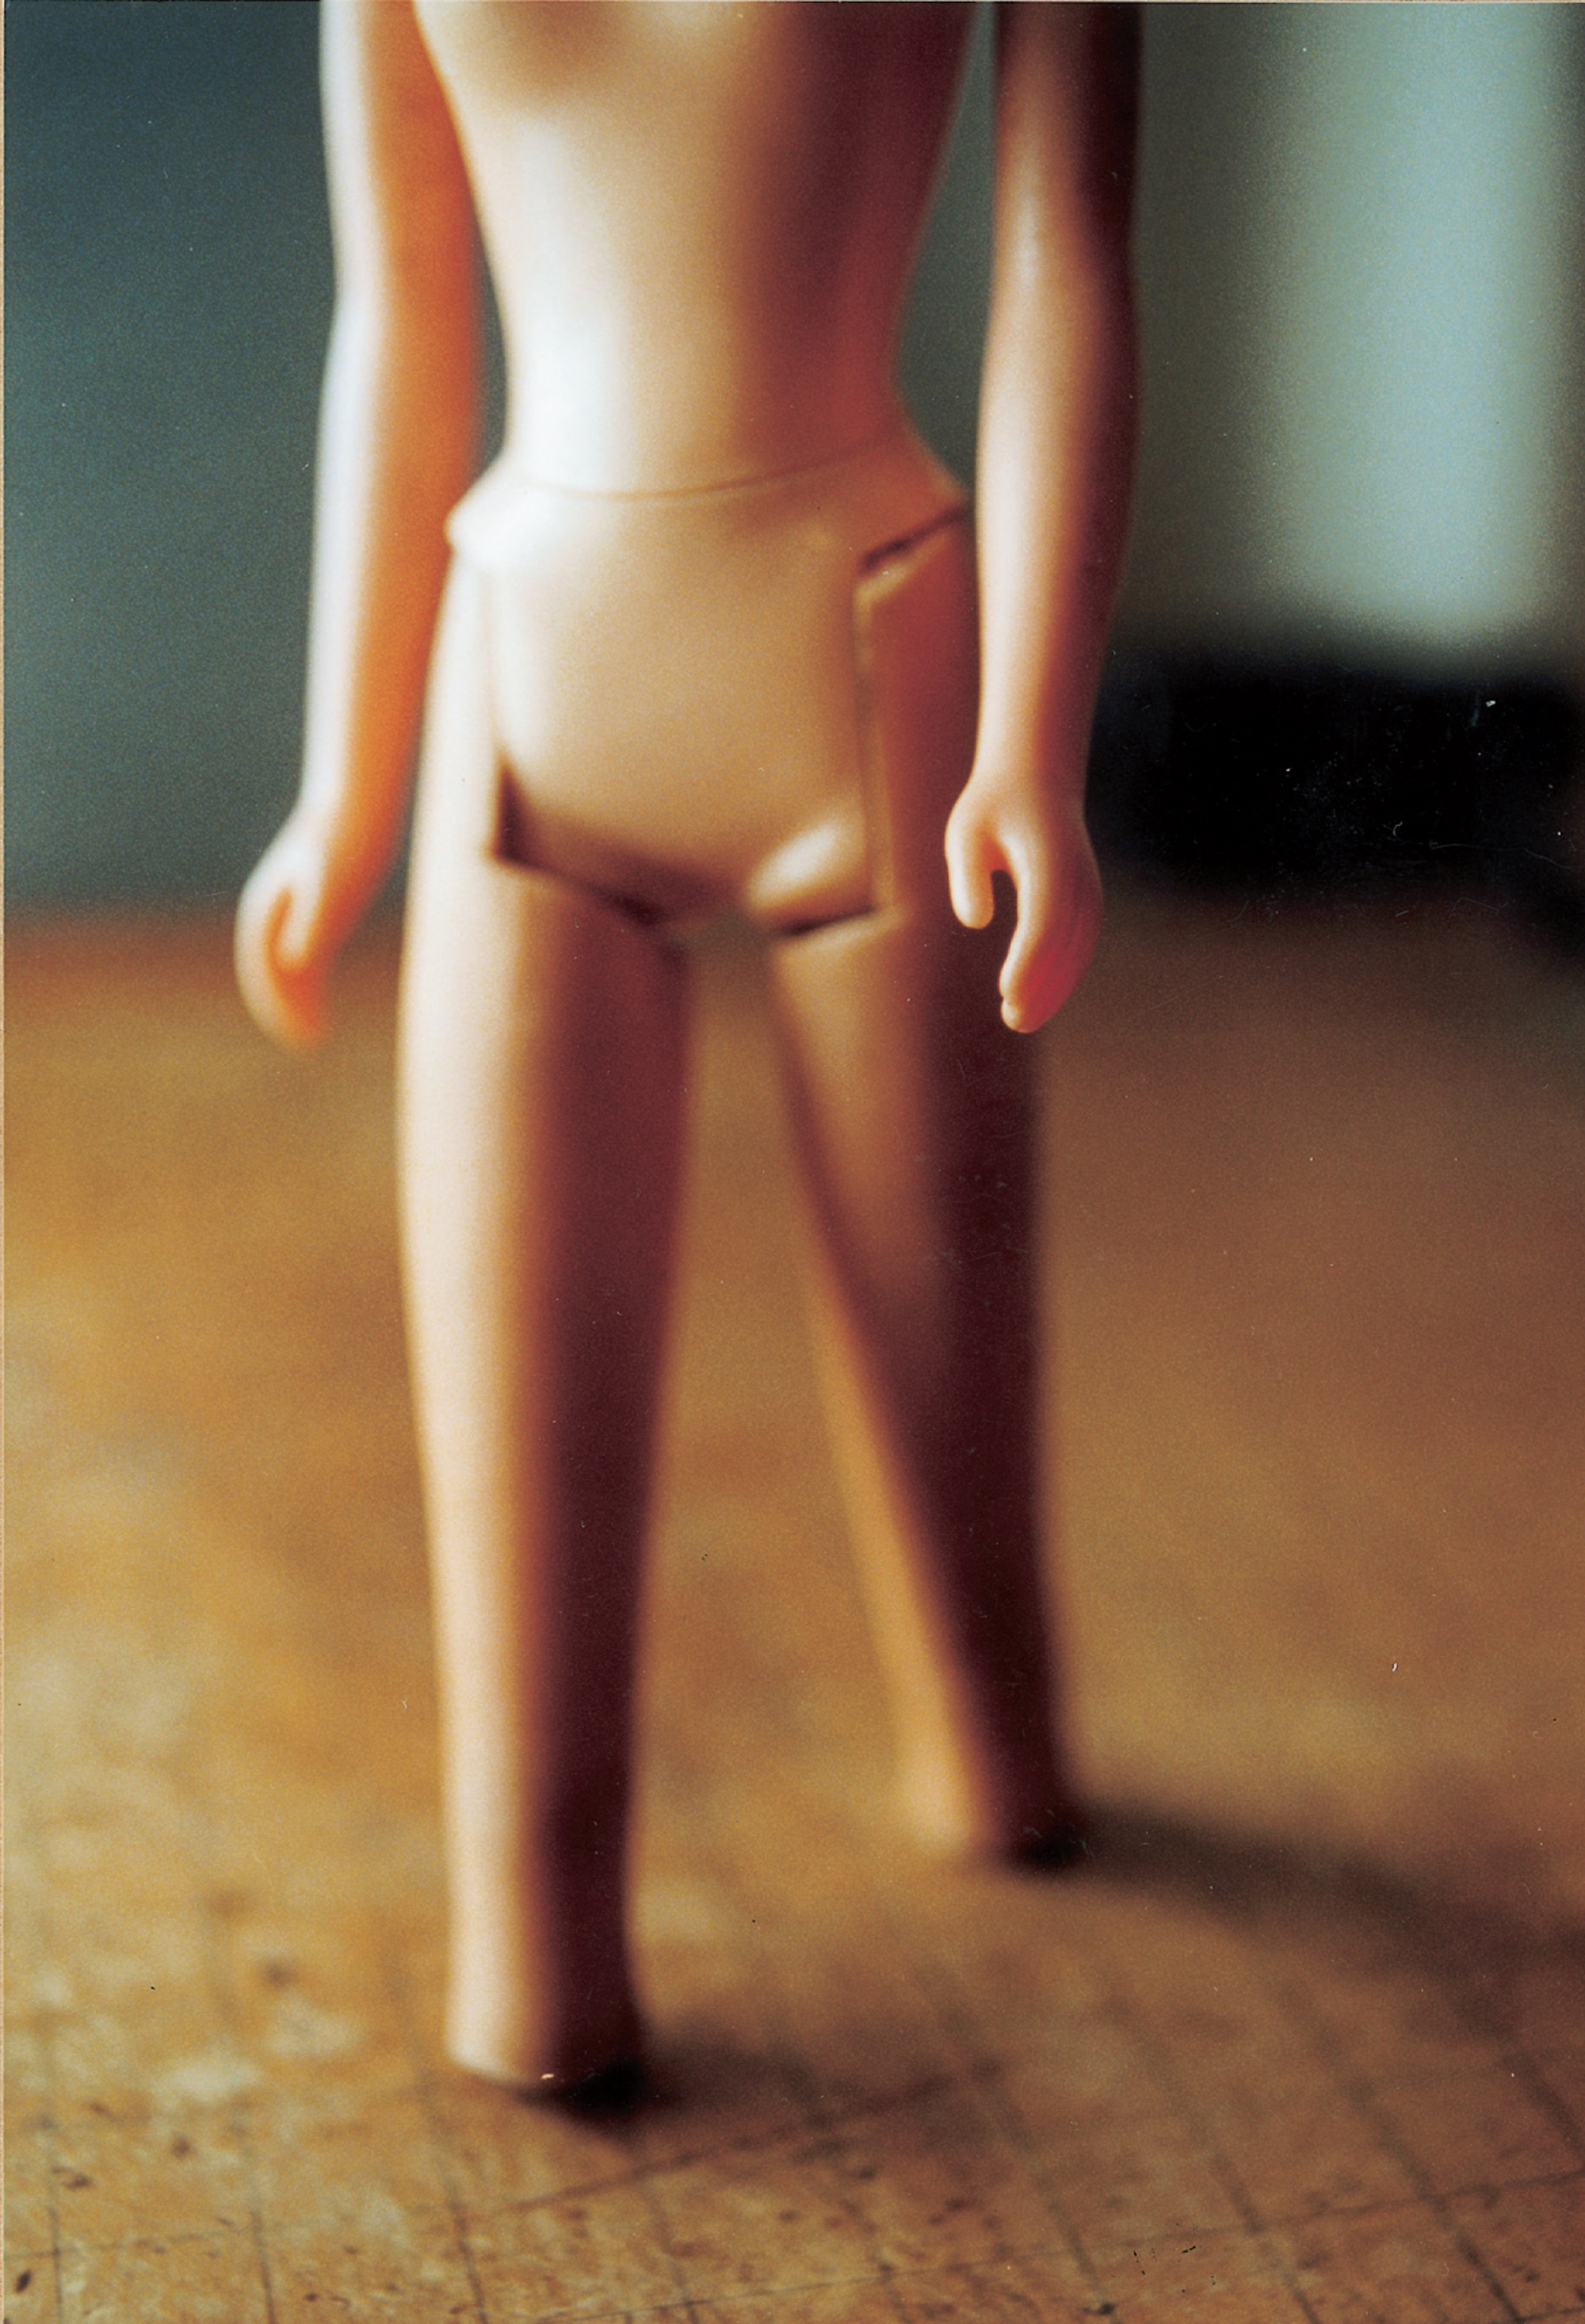 A photograph depicting a detail view of an unclothed doll named Barbie. The caption reads: Long snubbed by the Doll Games, a “found” Barbie was finally admitted in the late classical period, on the condition that she suffer her trademark blonde hair to be dyed black, and her legs to be amputated just below the knees. Unfortunately, the offensive “blackface” and ungainly leg stumps that resulted from these operations made her a laughingstock, and she never found a lasting place in the Doll Games; her name, if she was given one, has been forgotten.